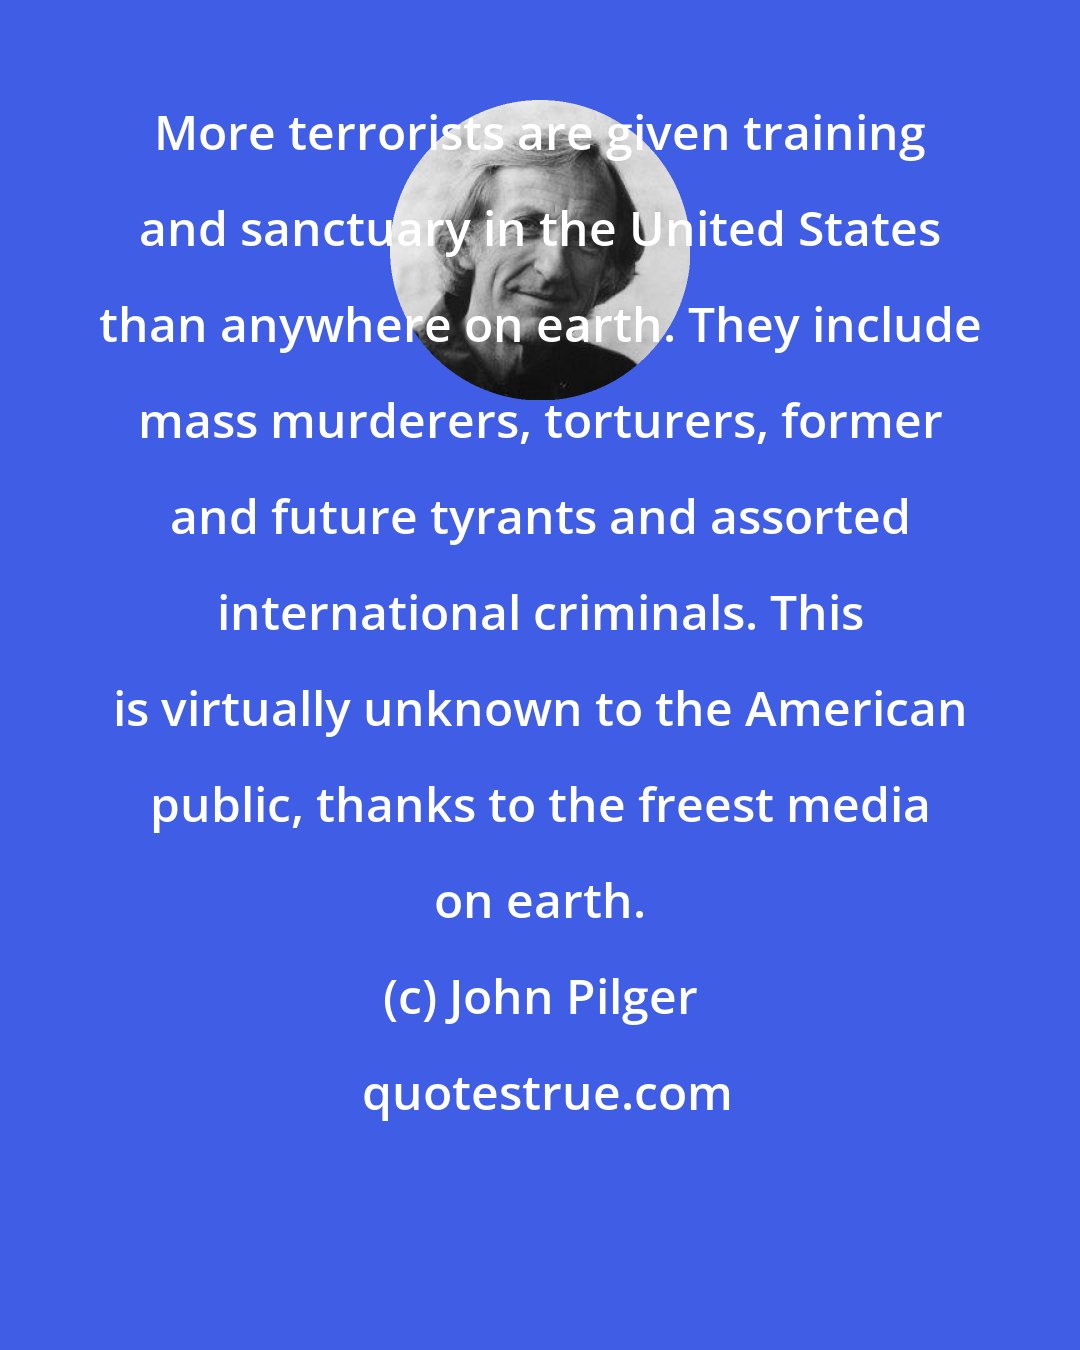 John Pilger: More terrorists are given training and sanctuary in the United States than anywhere on earth. They include mass murderers, torturers, former and future tyrants and assorted international criminals. This is virtually unknown to the American public, thanks to the freest media on earth.